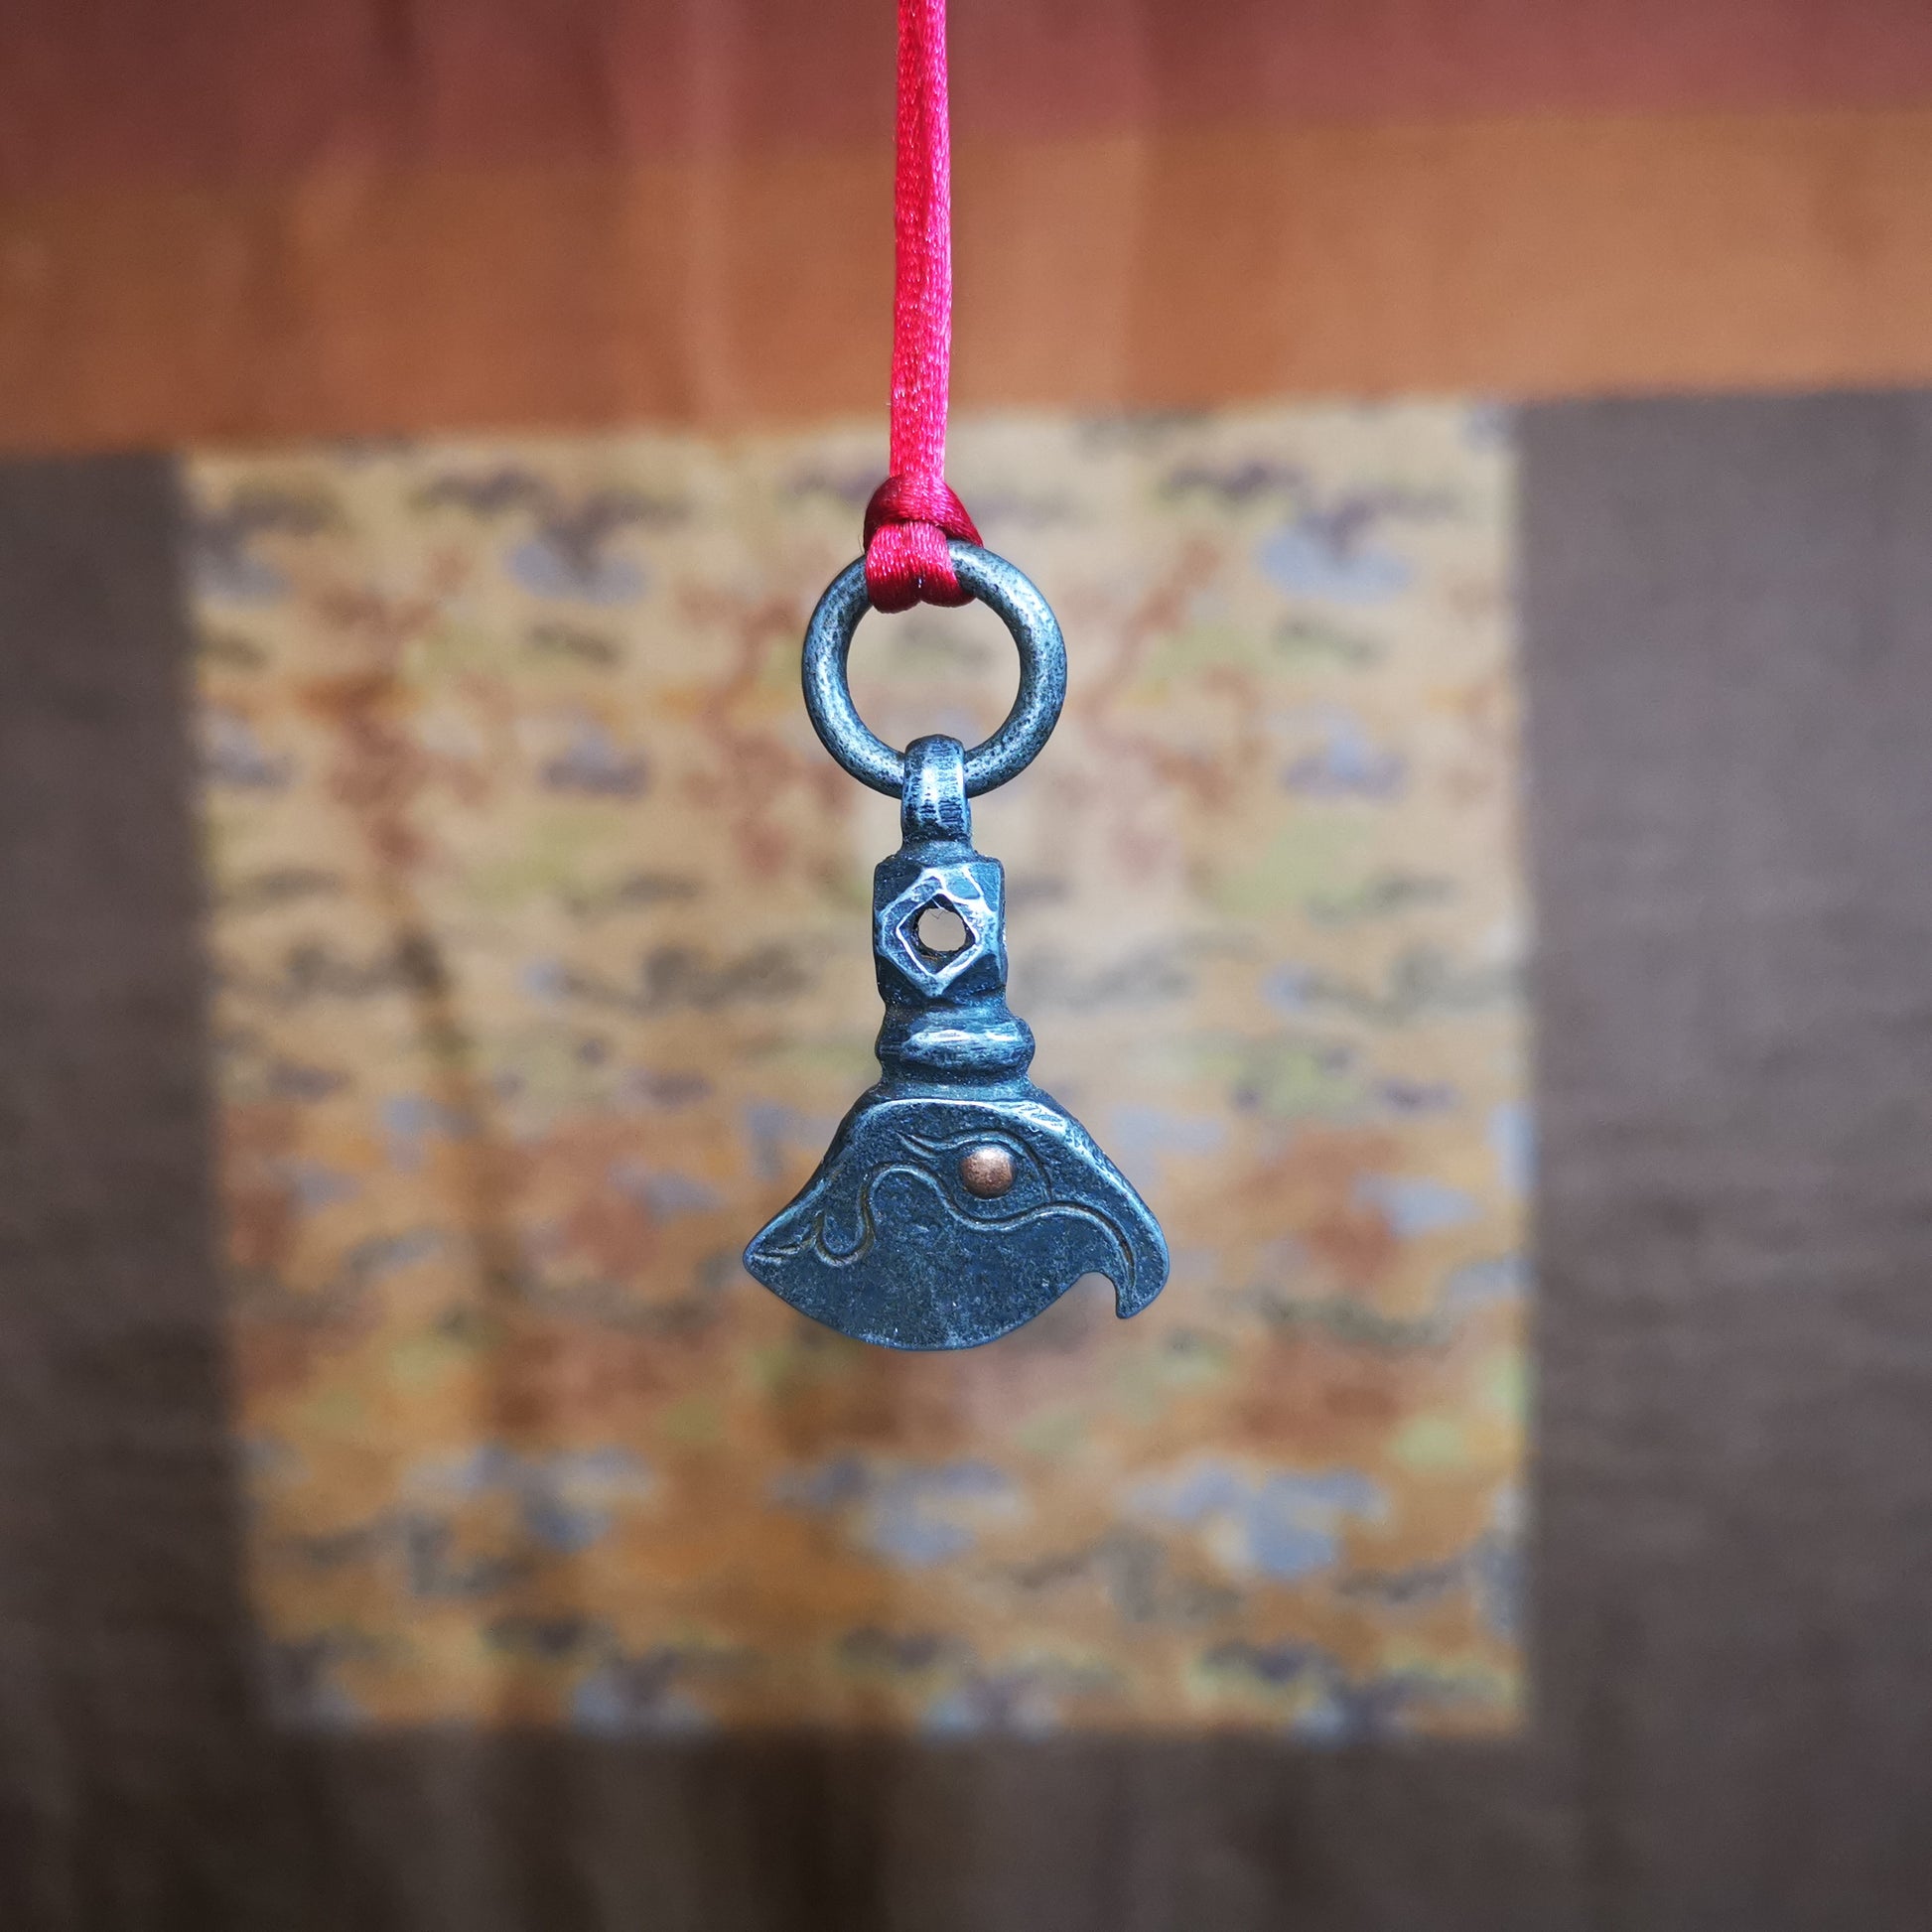 This kartika amulet was made by Tibetan craftsmen in Hepo Township, Baiyu County, the birthplace of the famous Tibetan handicrafts. It's made of cold iron, inlaid copper,carved with could pattern,size is 1.1 × 0.8 inches. You can make it into a necklace, or a keychain, or just put it on your desk,as an ornament.